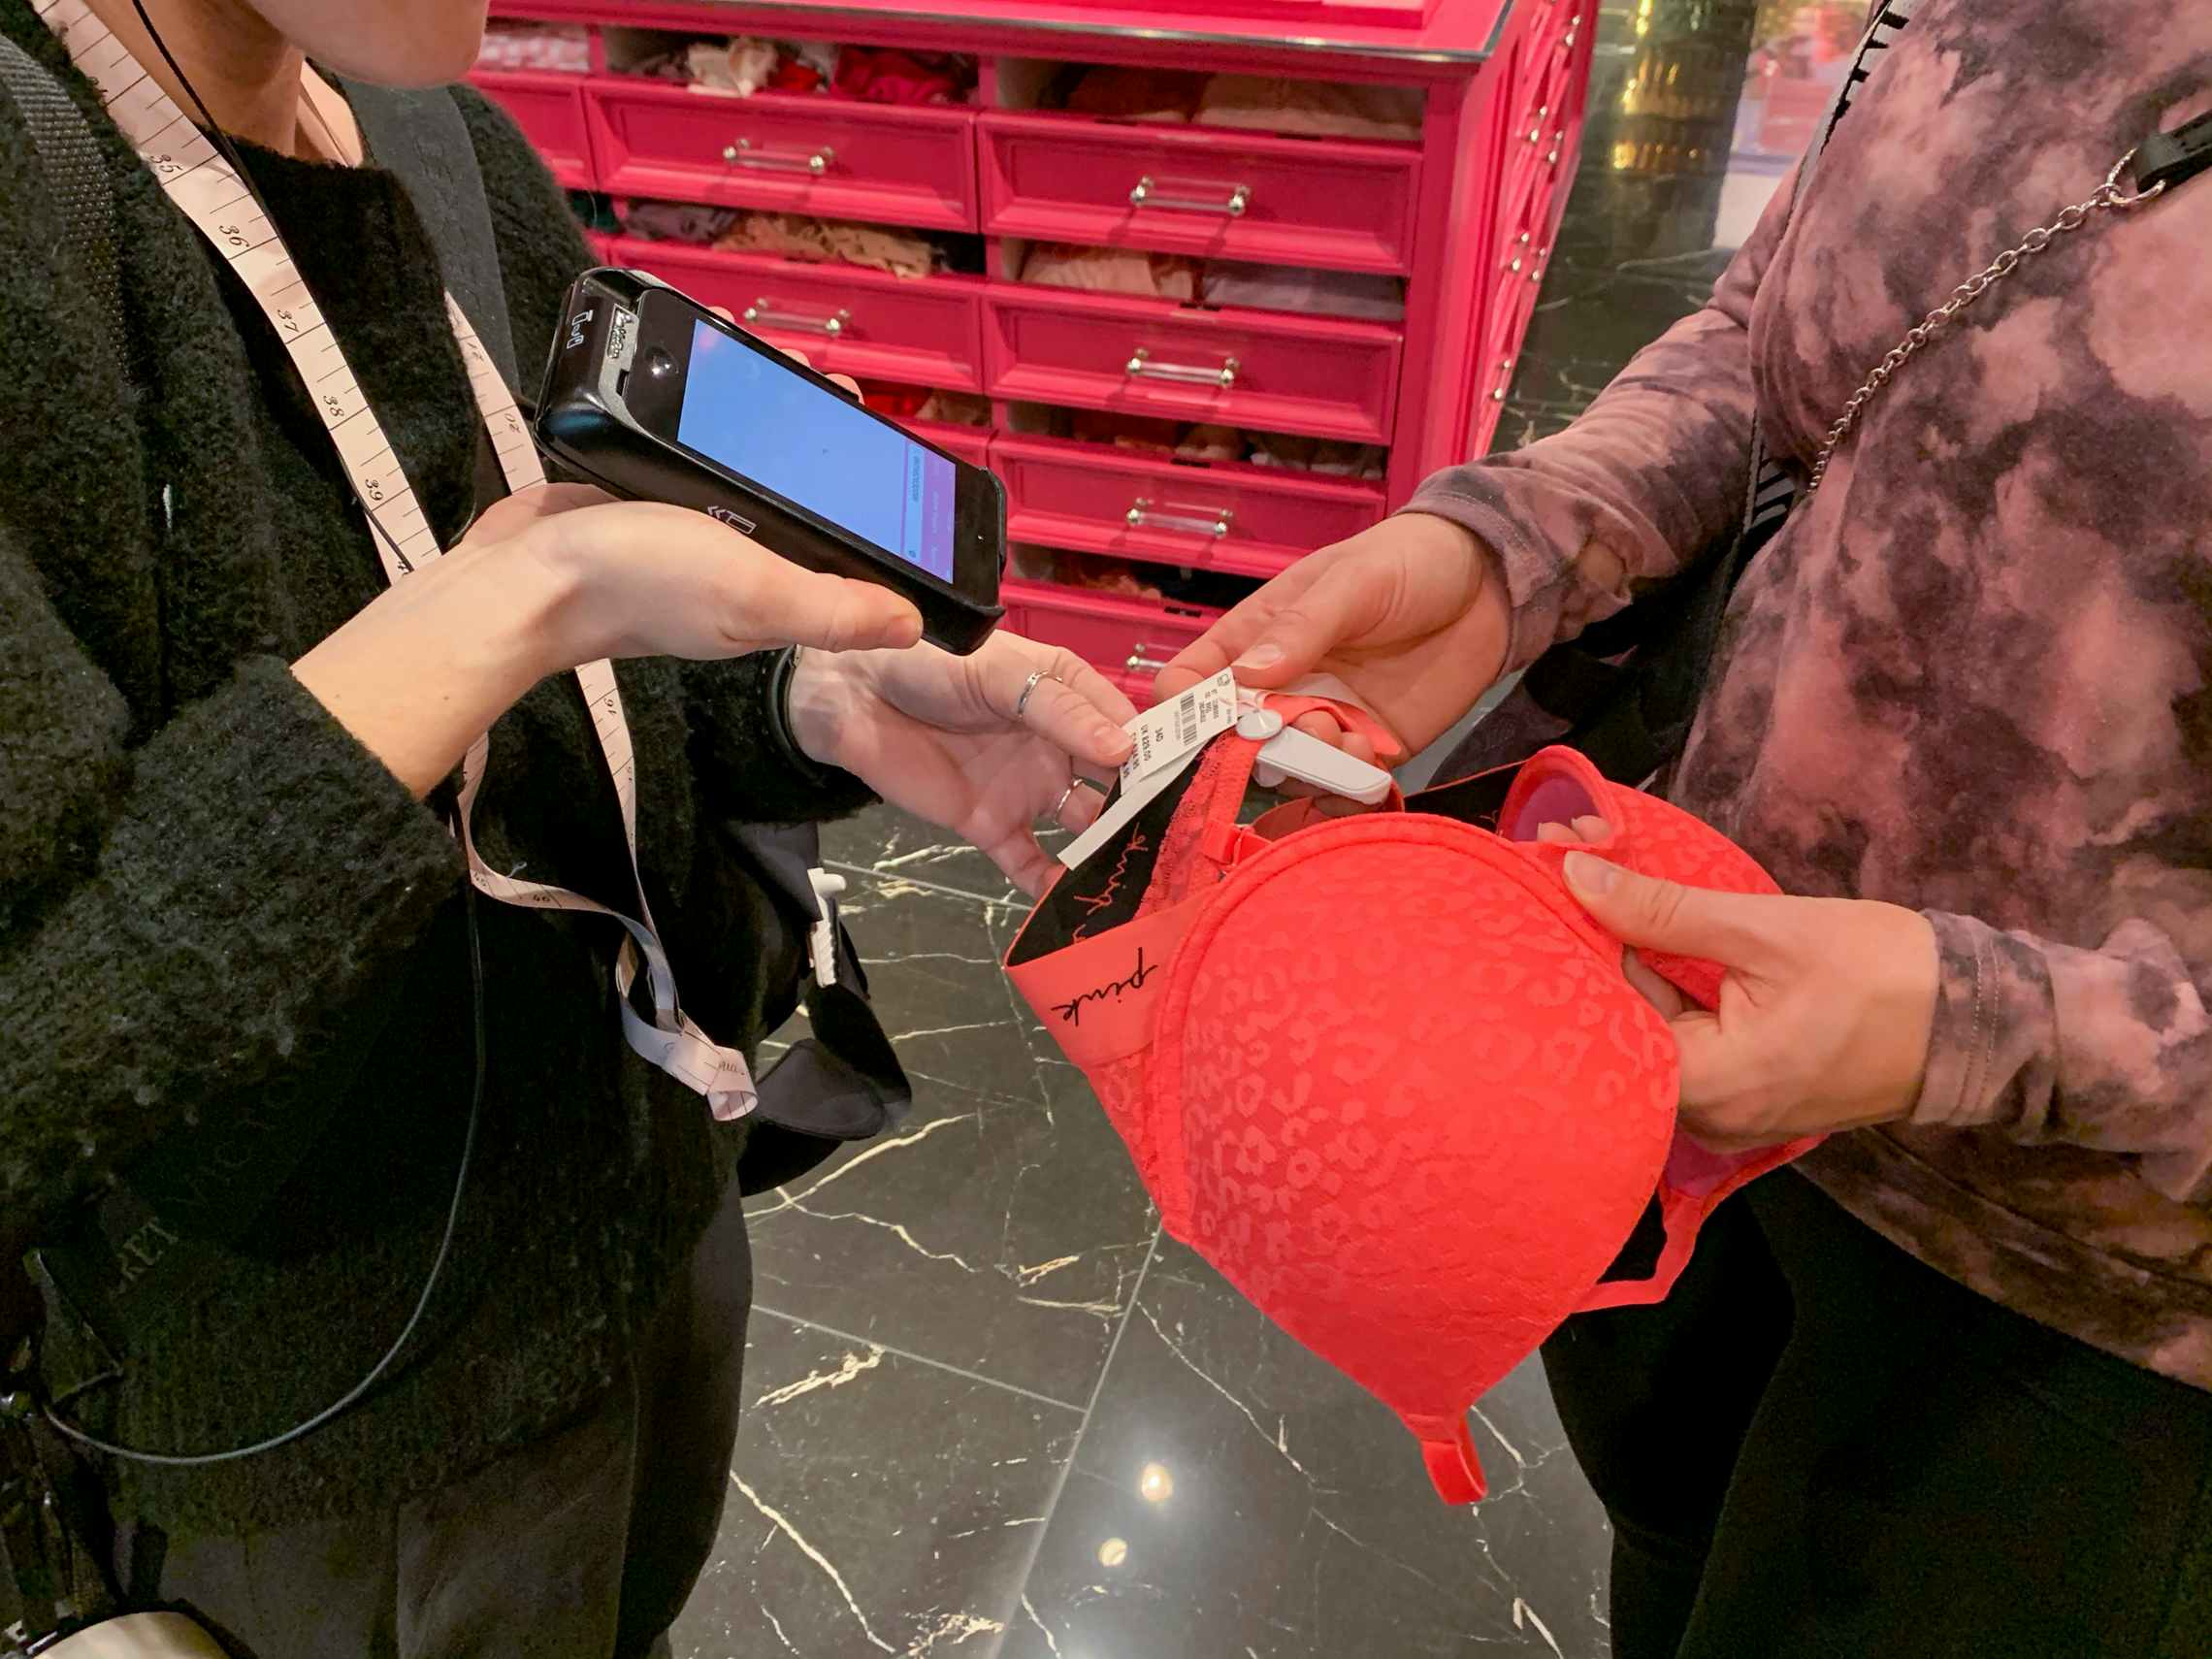 Victoria's Secret - TODAY ONLY: A special treat just for our Cardmembers.  Enjoy an Additional 10% off your Semi-Annual Sale Purchase when you use  your Victoria or PINK Credit Card.* Use code